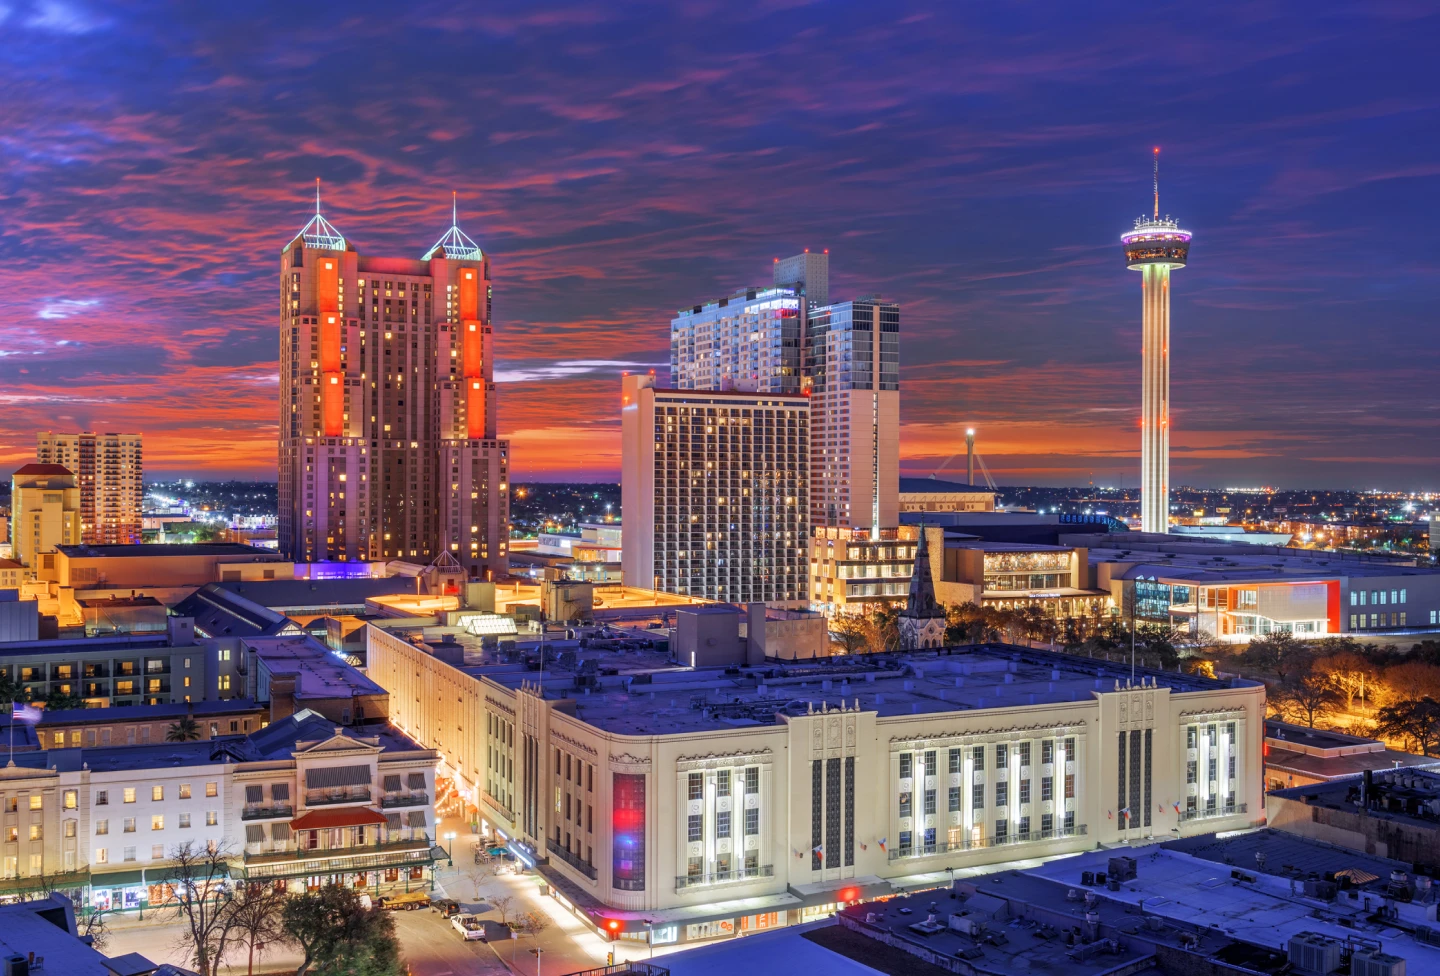 A view of the San Antonio skyline at sunset